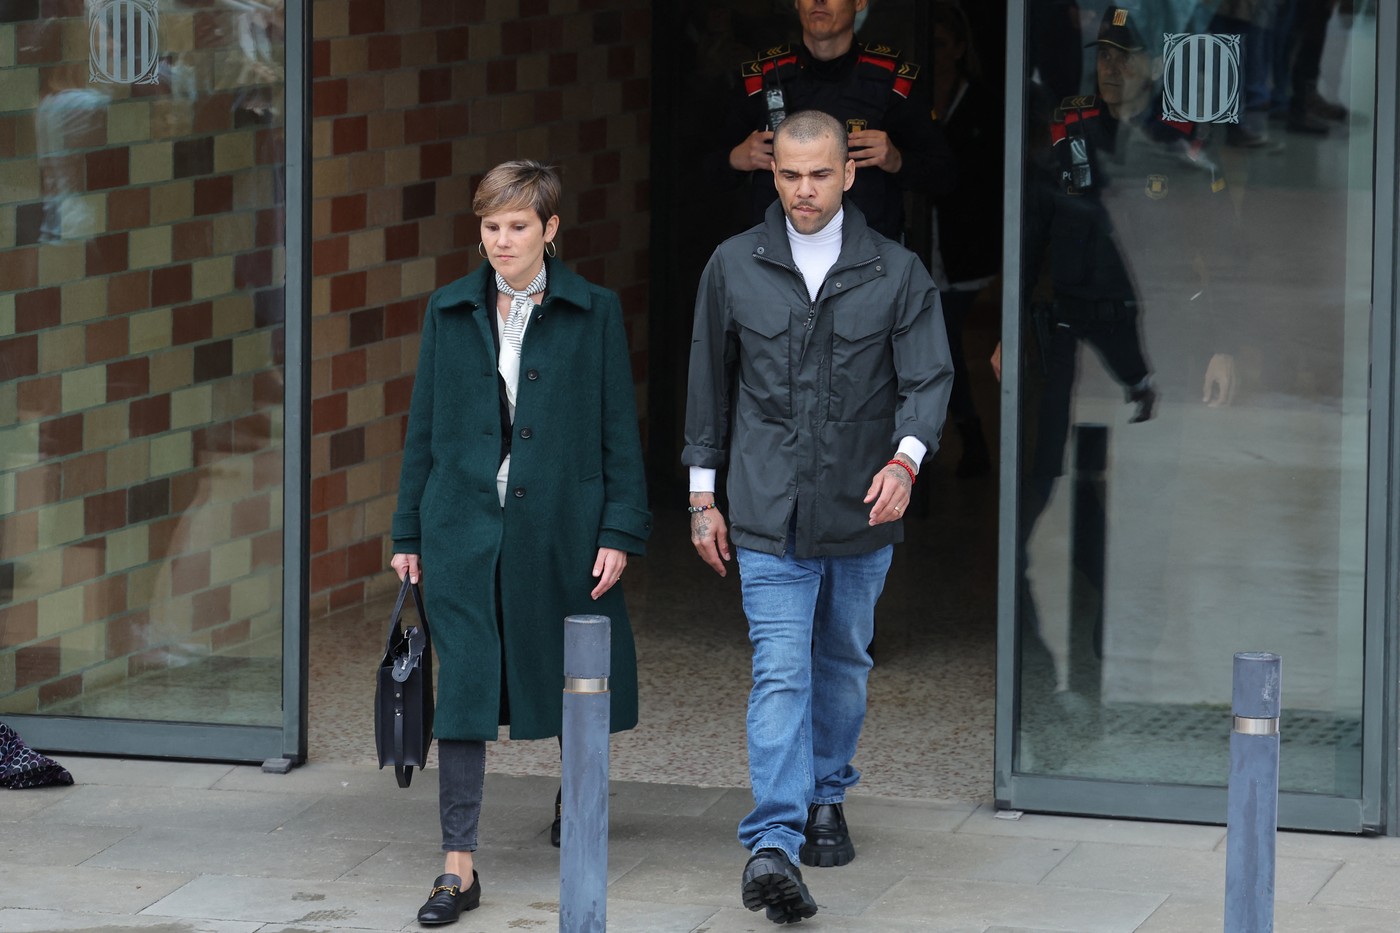 Convicted rapist and former Brazil international football player Dani Alves (R) leaves on provisional release, flanked by his lawyers Ines Guardiola at Brians 2 prison in Barcelona on March 25, 2024. Convicted rapist and former Brazil international Dani Alves left a jail in Barcelona on March 25, 2024 after posting the one-million-euro bail set by a Barcelona court to ensure his release pending appeal. Ex-Brazil star has been sentenced to 4.5 years in jail for rape on February 22, 2024.,Image: 859474235, License: Rights-managed, Restrictions: , Model Release: no